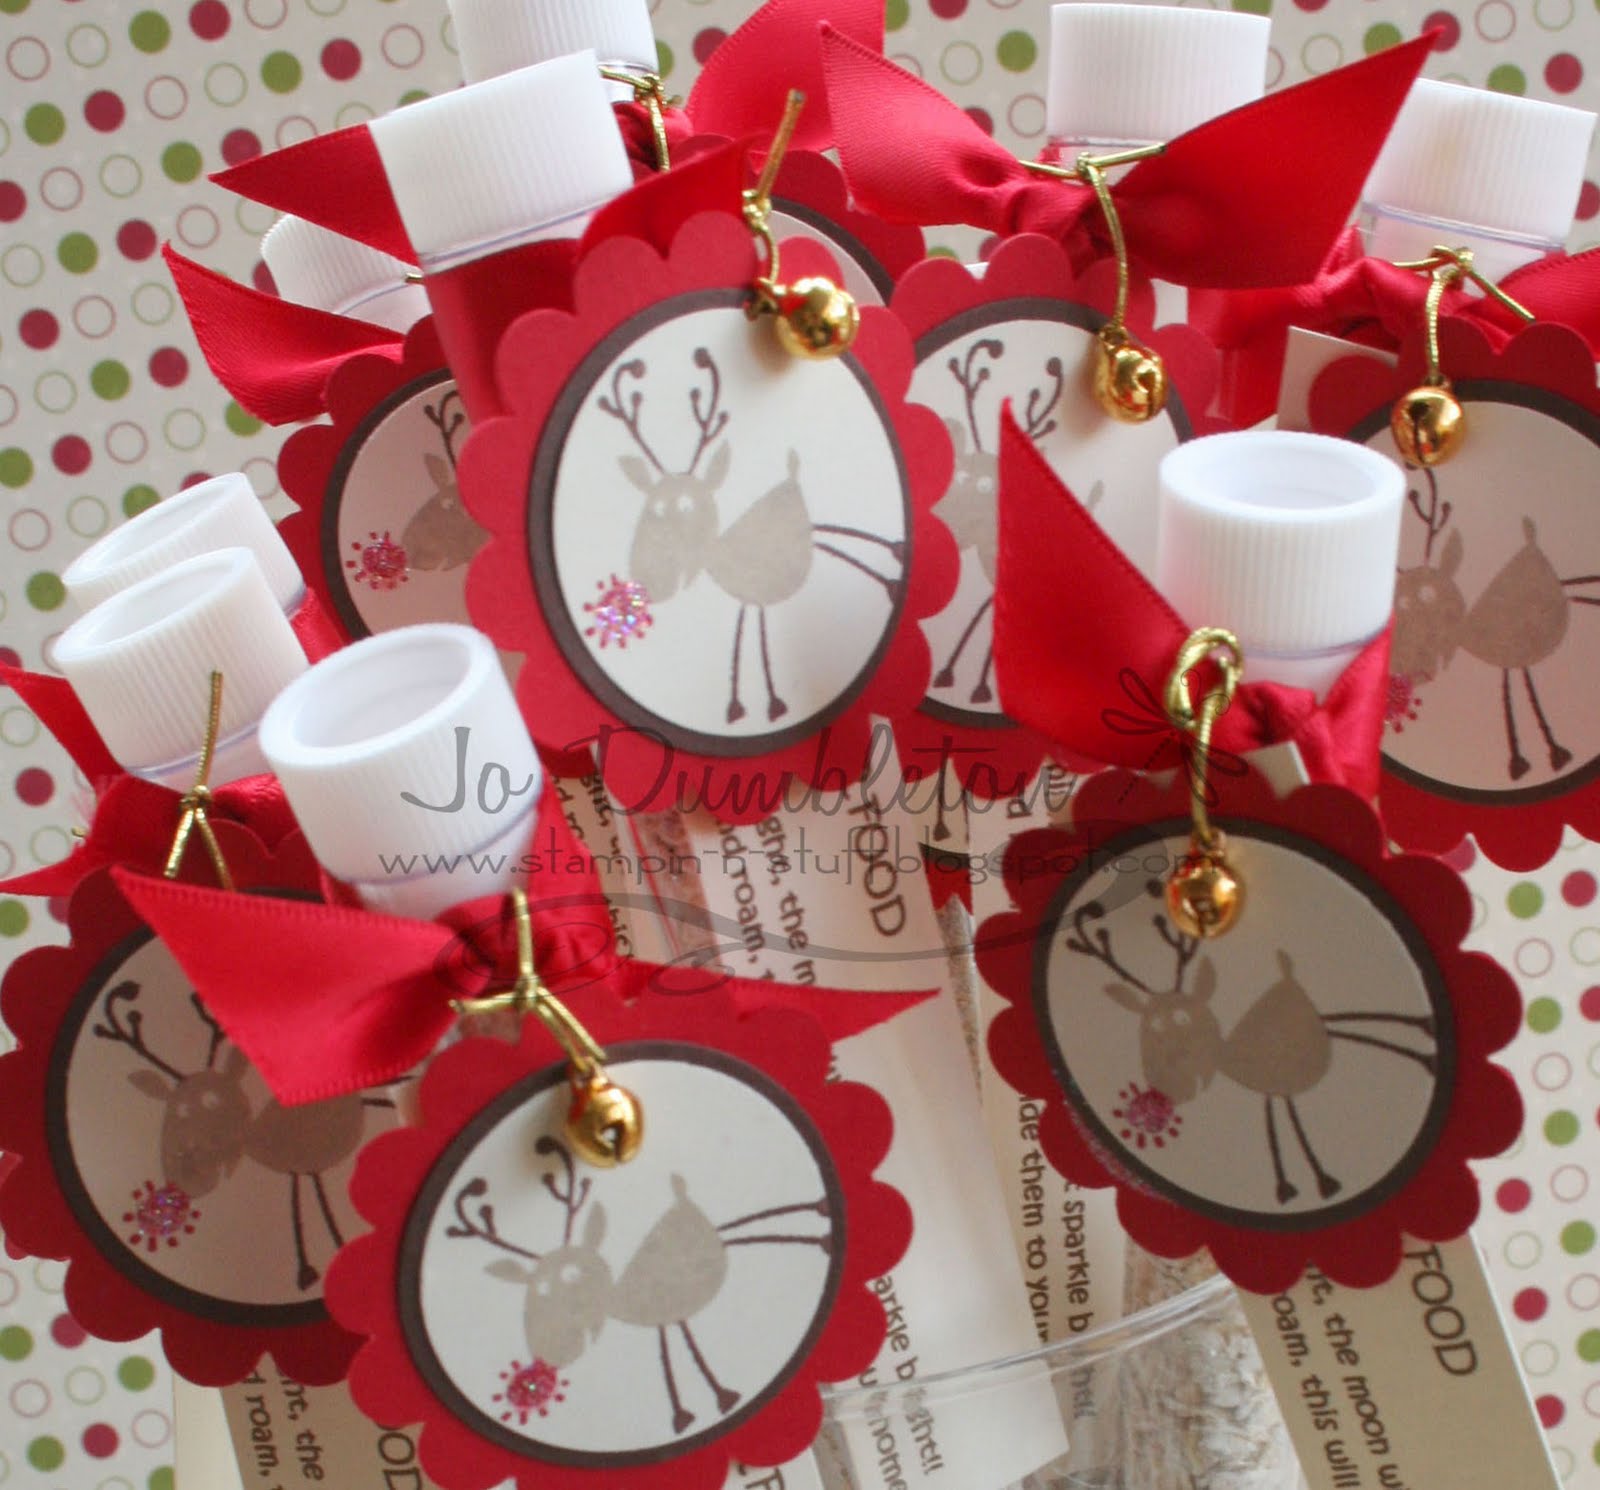 Christmas Crafts to Sell at Craft Fairs